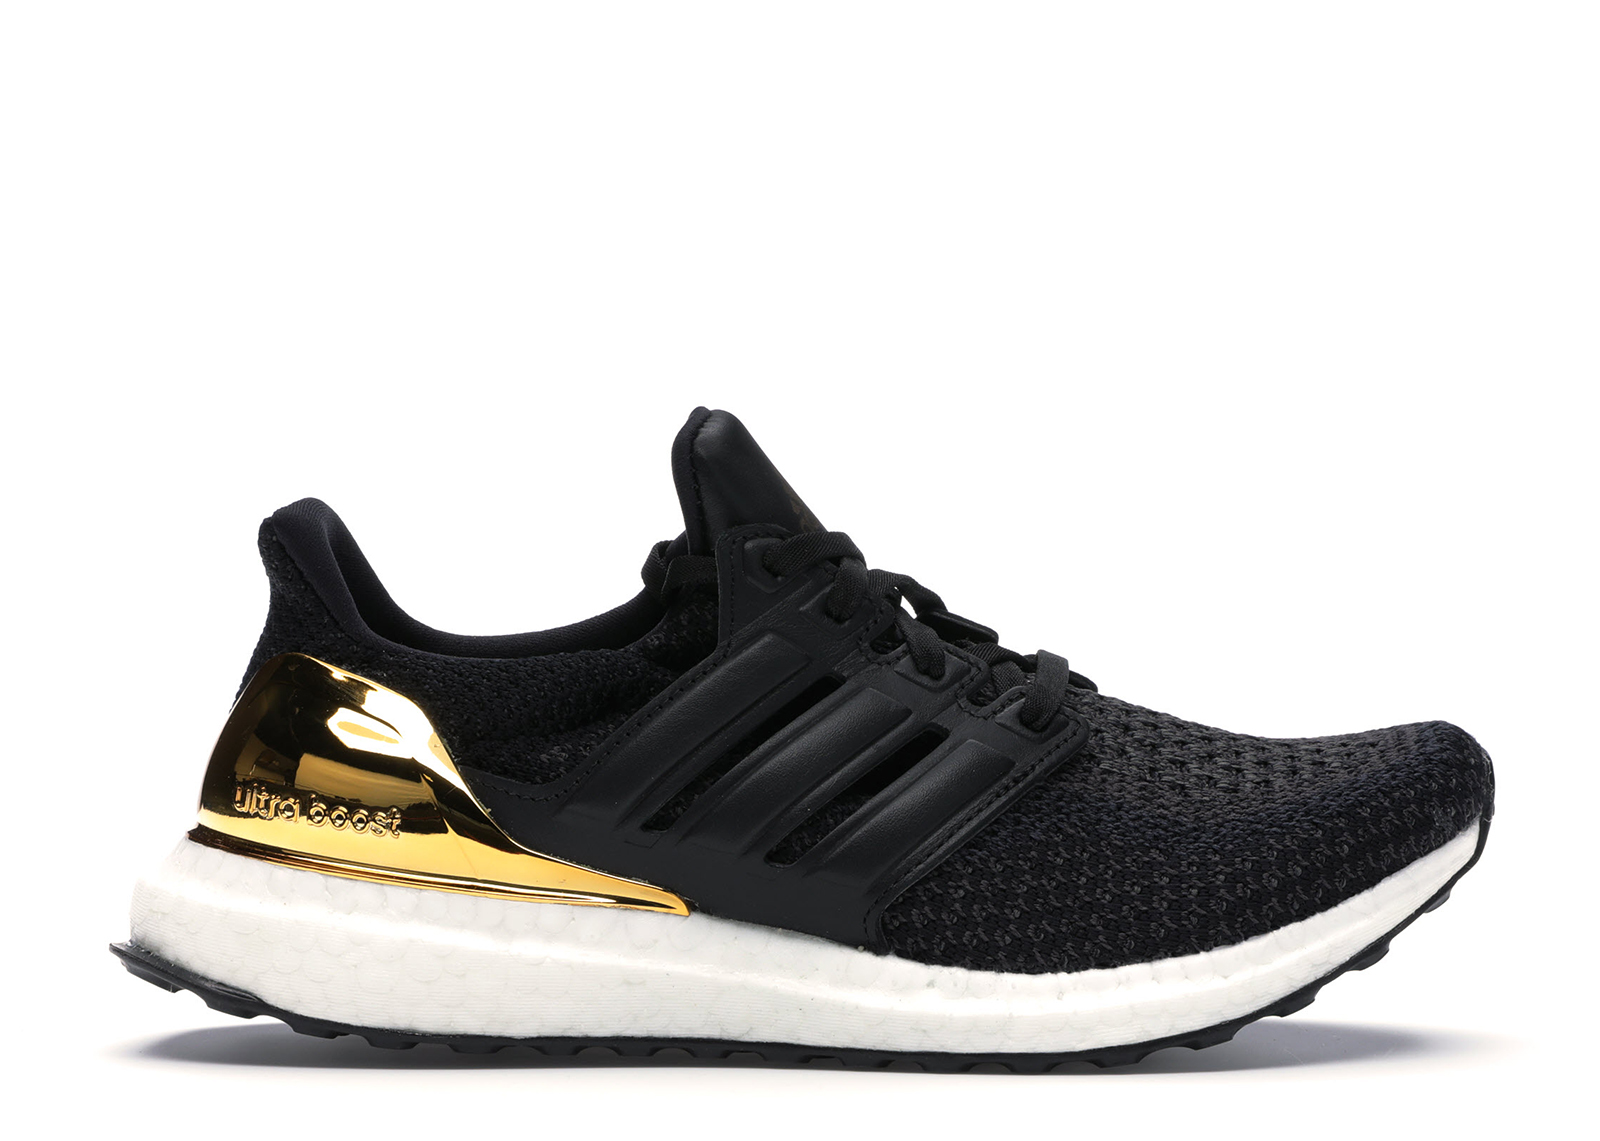 adidas Ultra Boost 1.0 Gold Medal 2018 